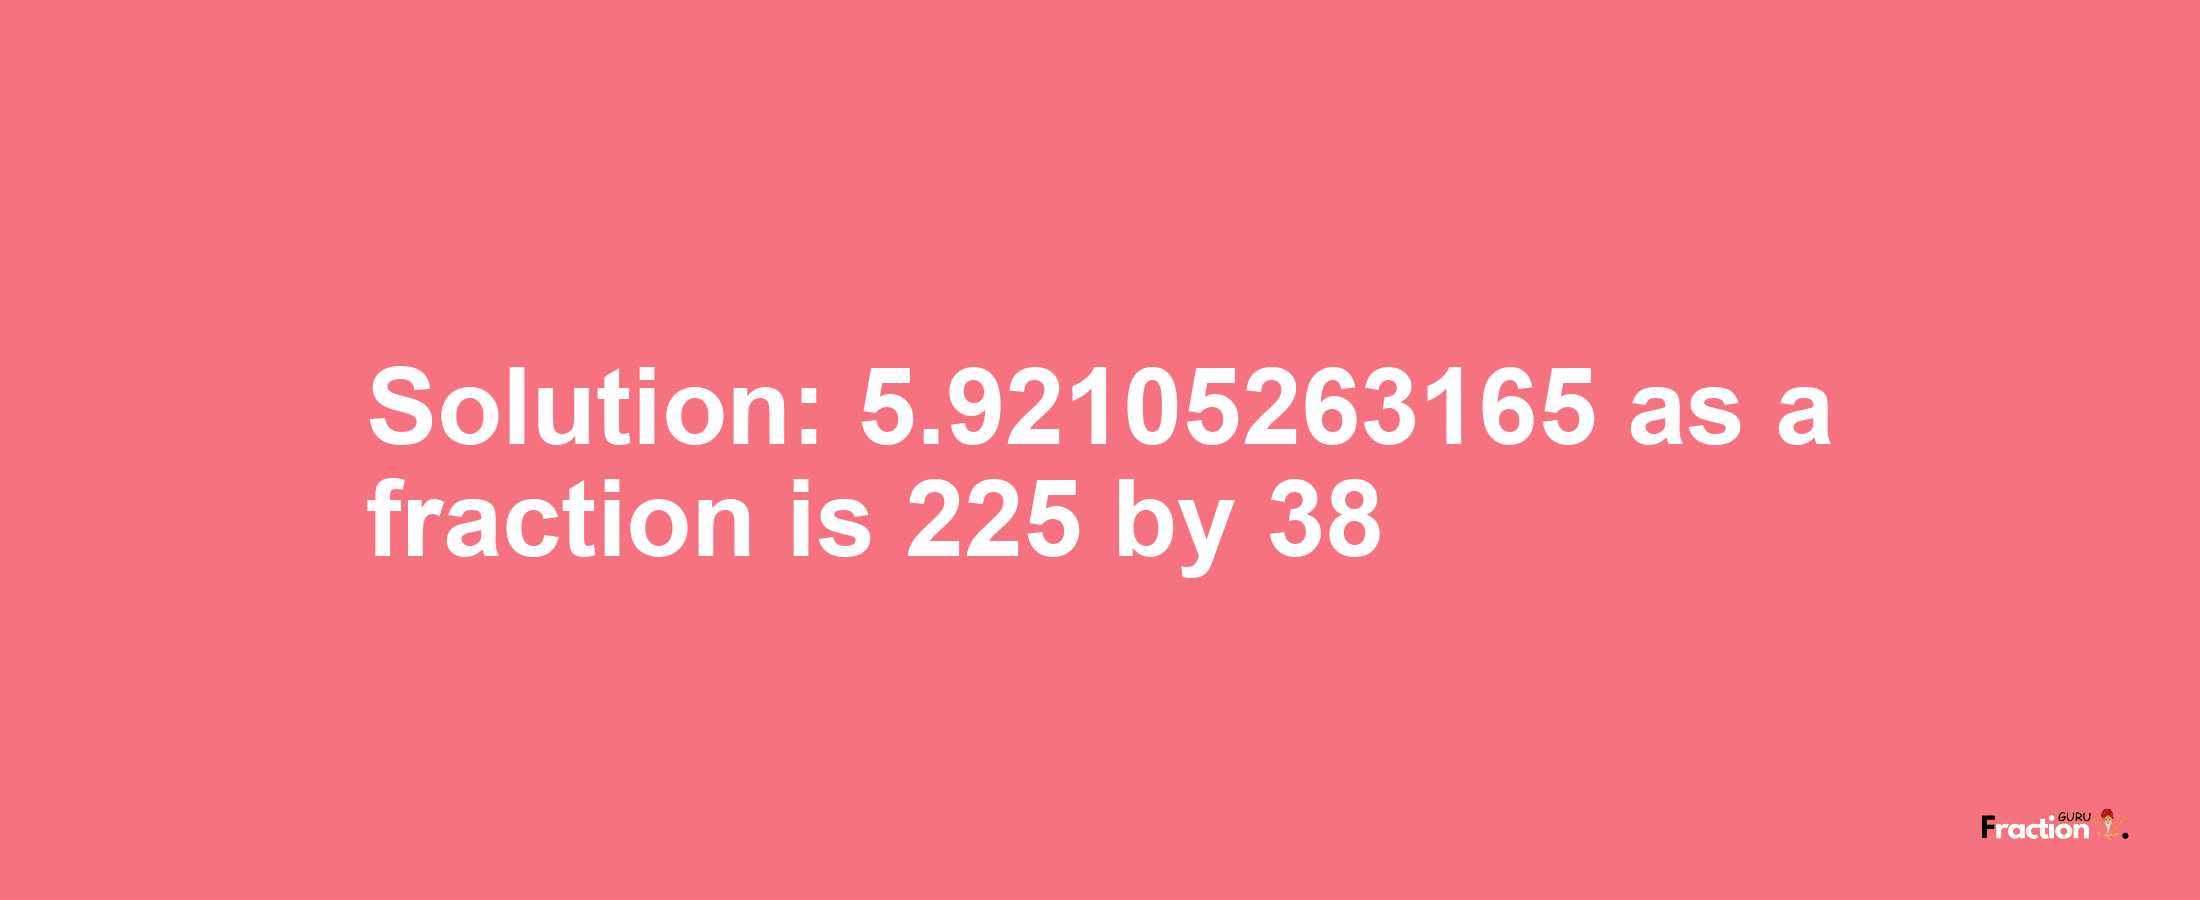 Solution:5.92105263165 as a fraction is 225/38